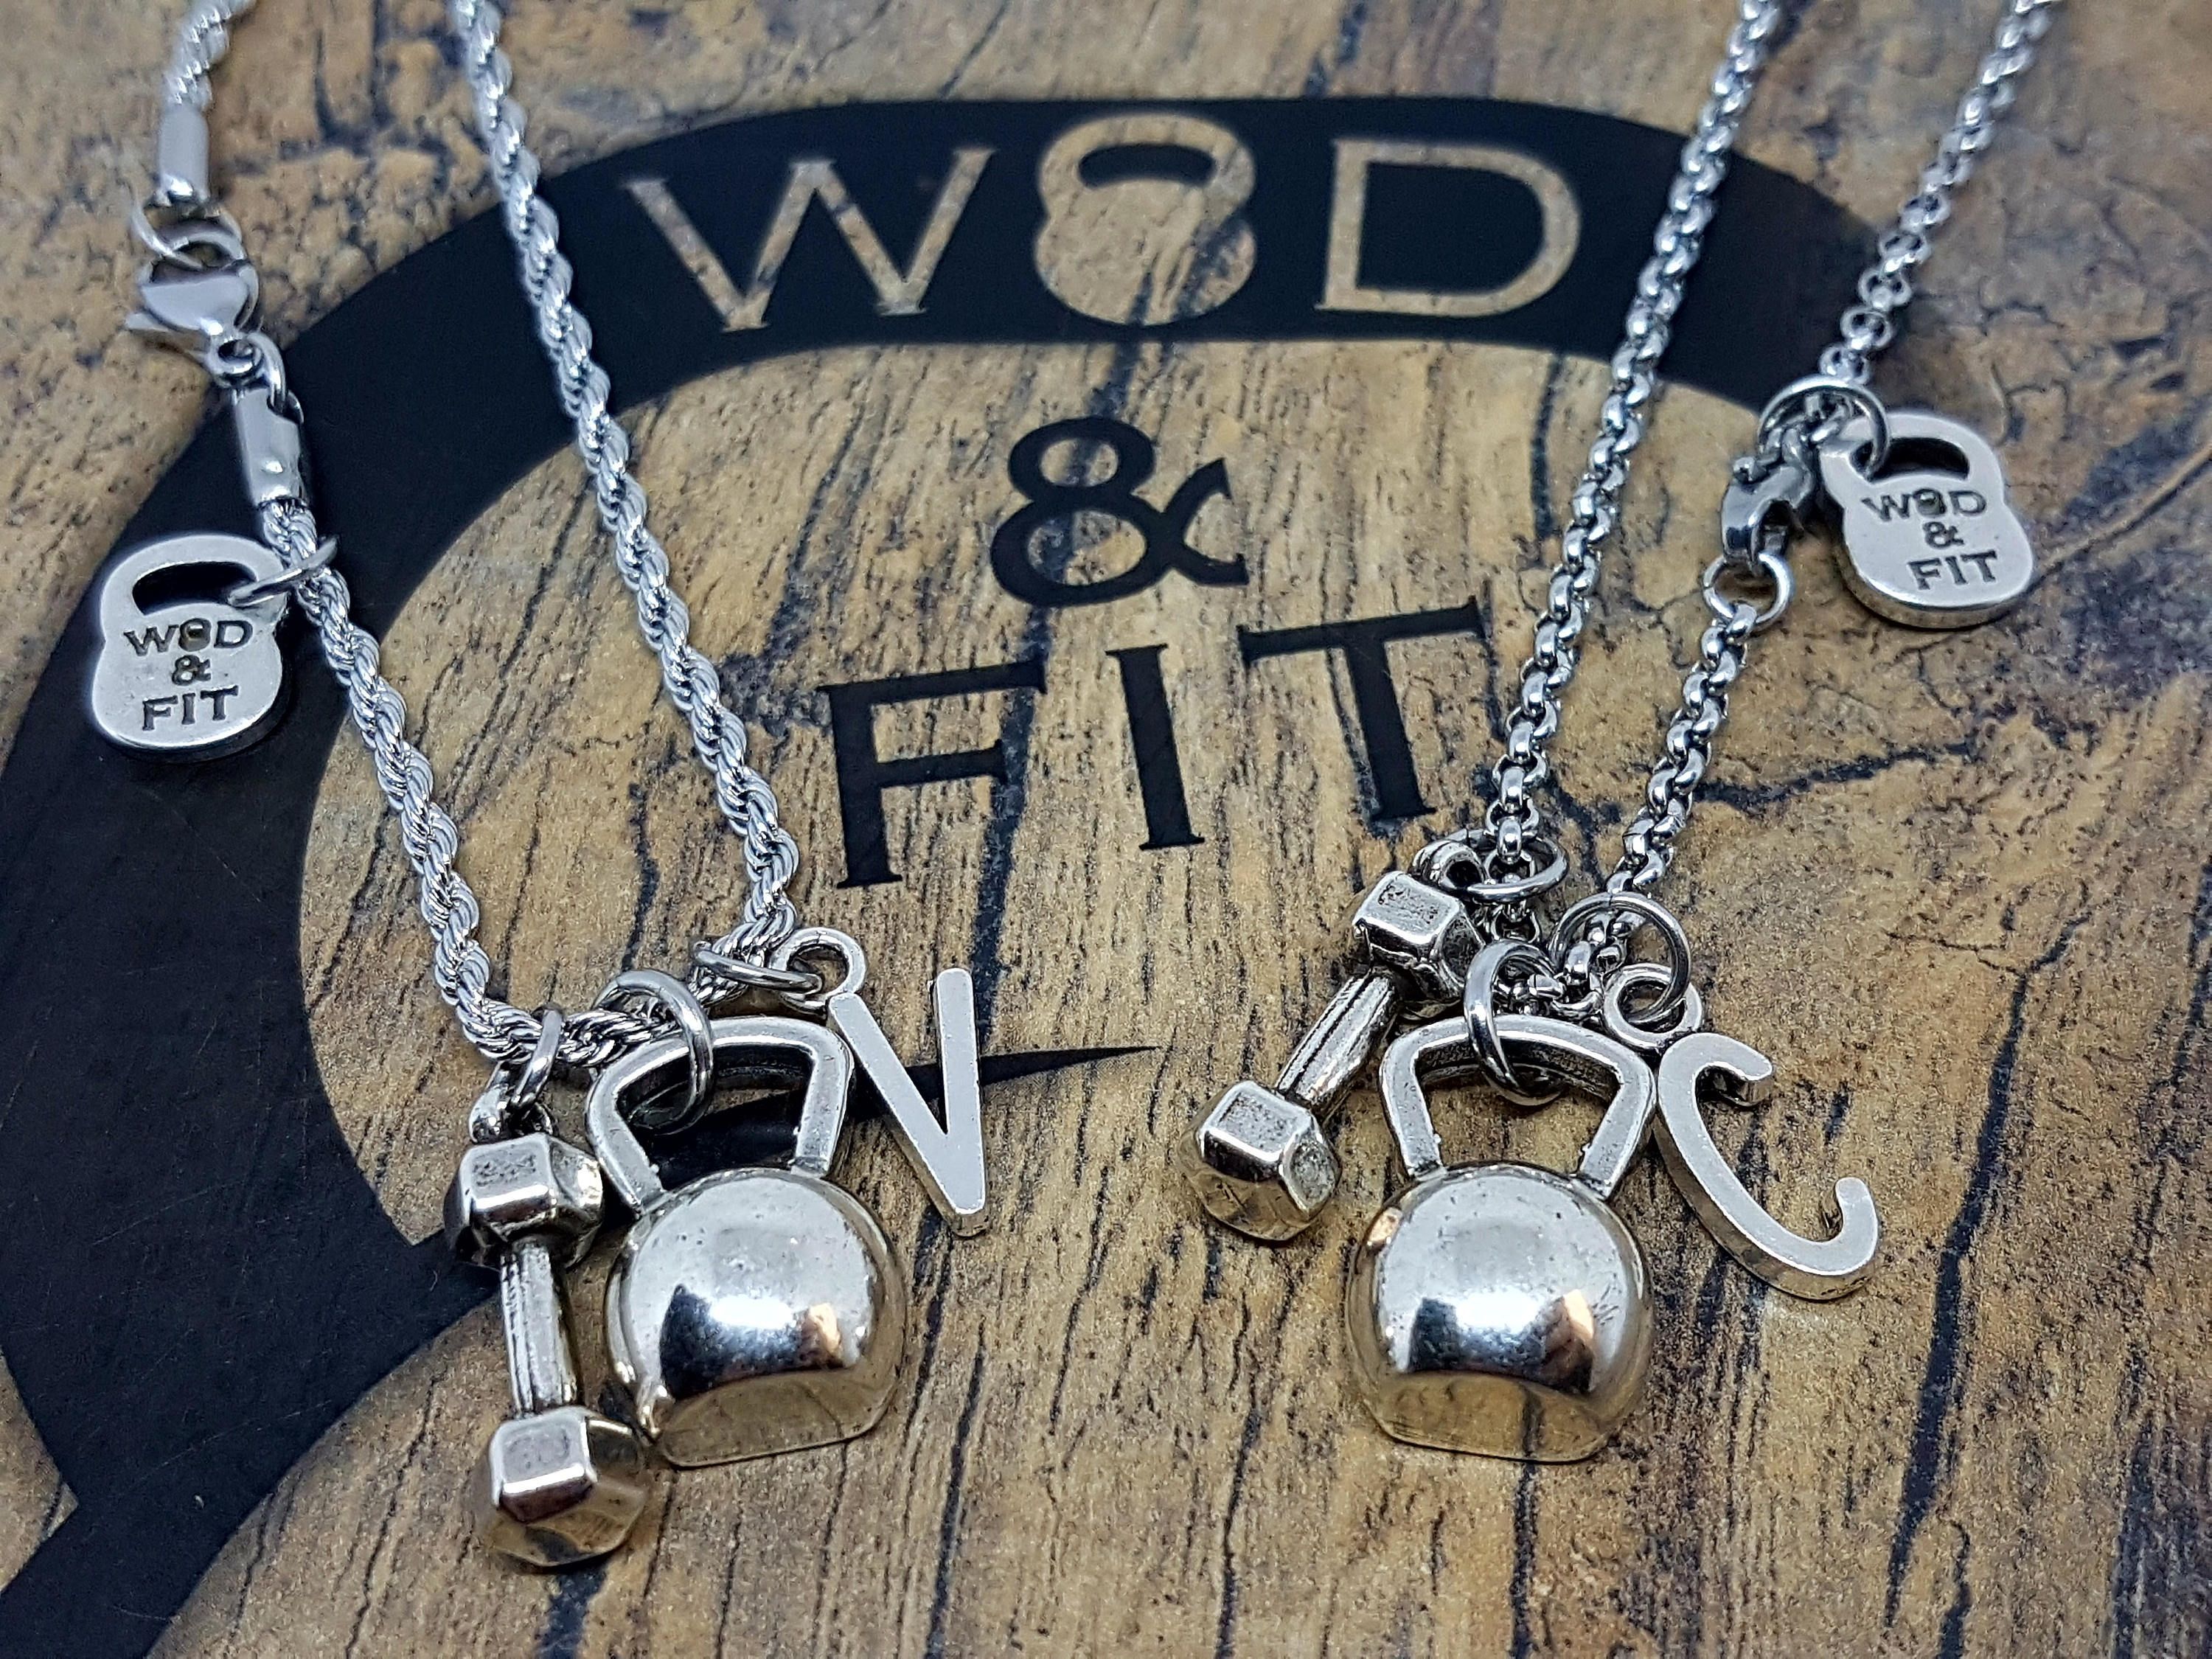 Couple Kettlebell Workout Necklace,Dumbbell Hex & Initial letter.Workout Jewelry,Fit mom,Fit girl,Bodybuilding,Custom necklace,Couples Gift -   18 parejas fitness gym
 ideas